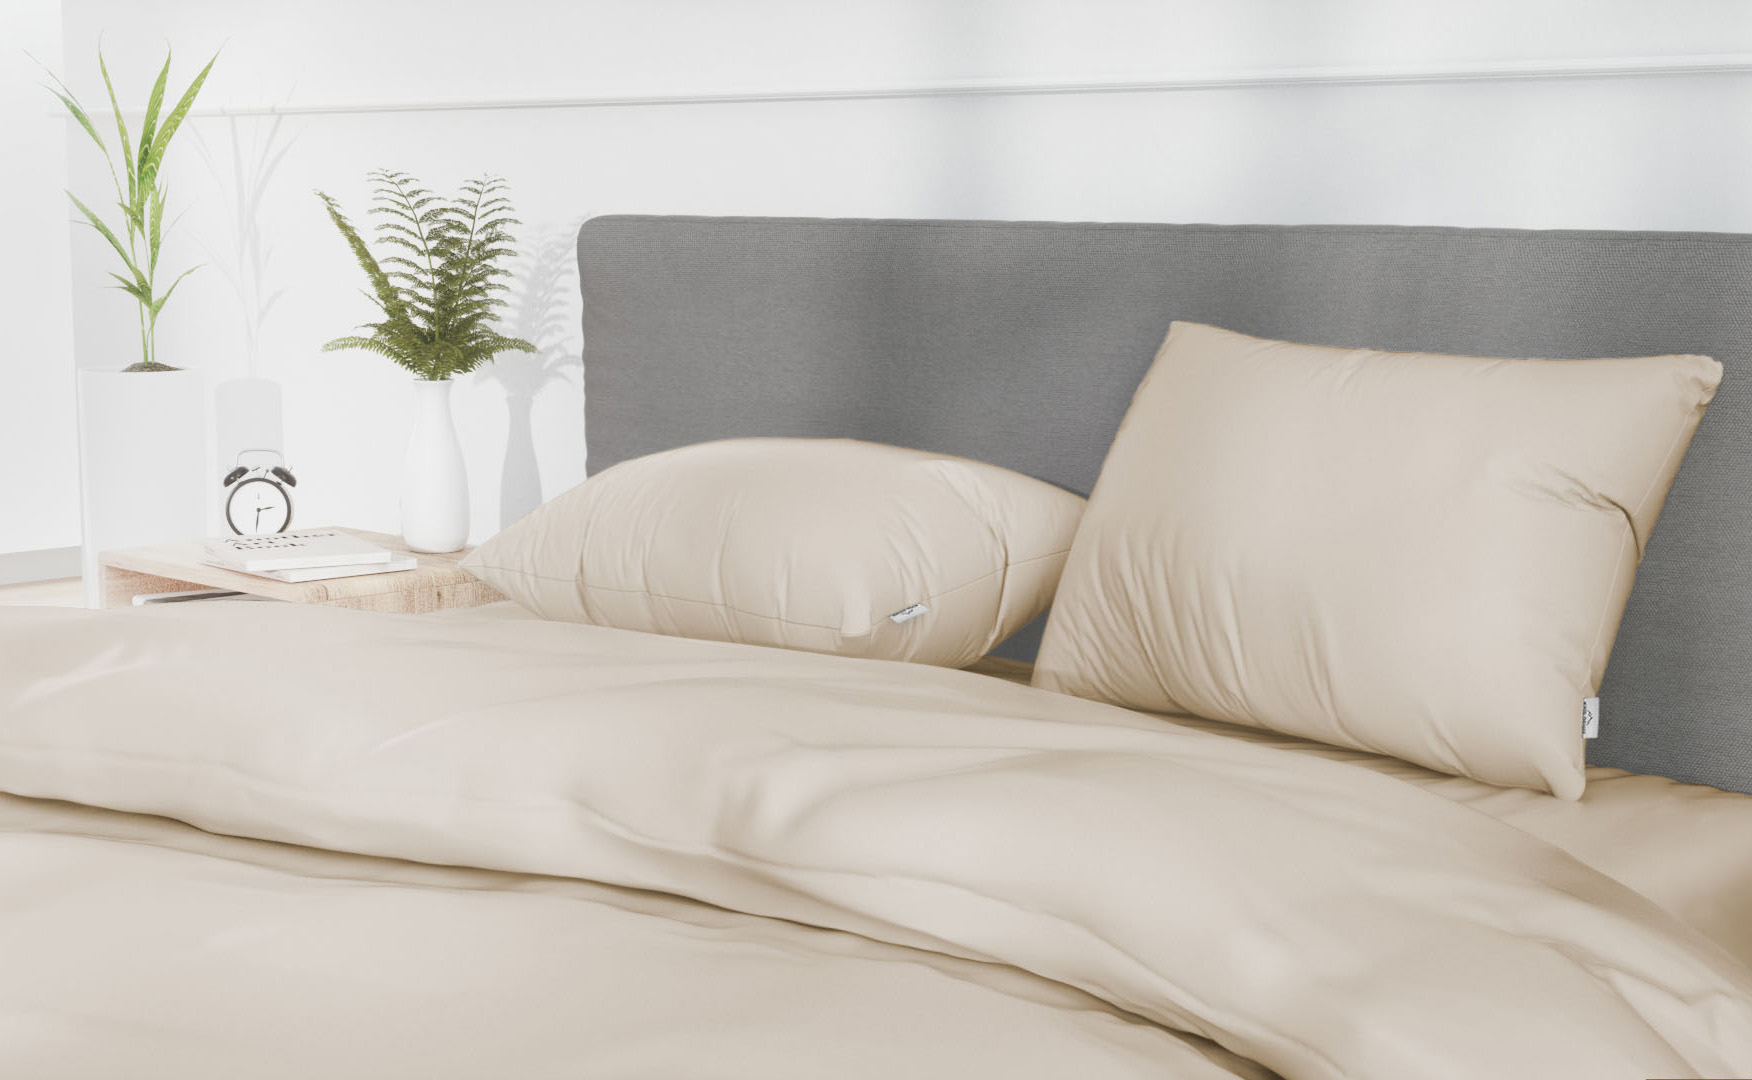 Make your bed a place of dreams